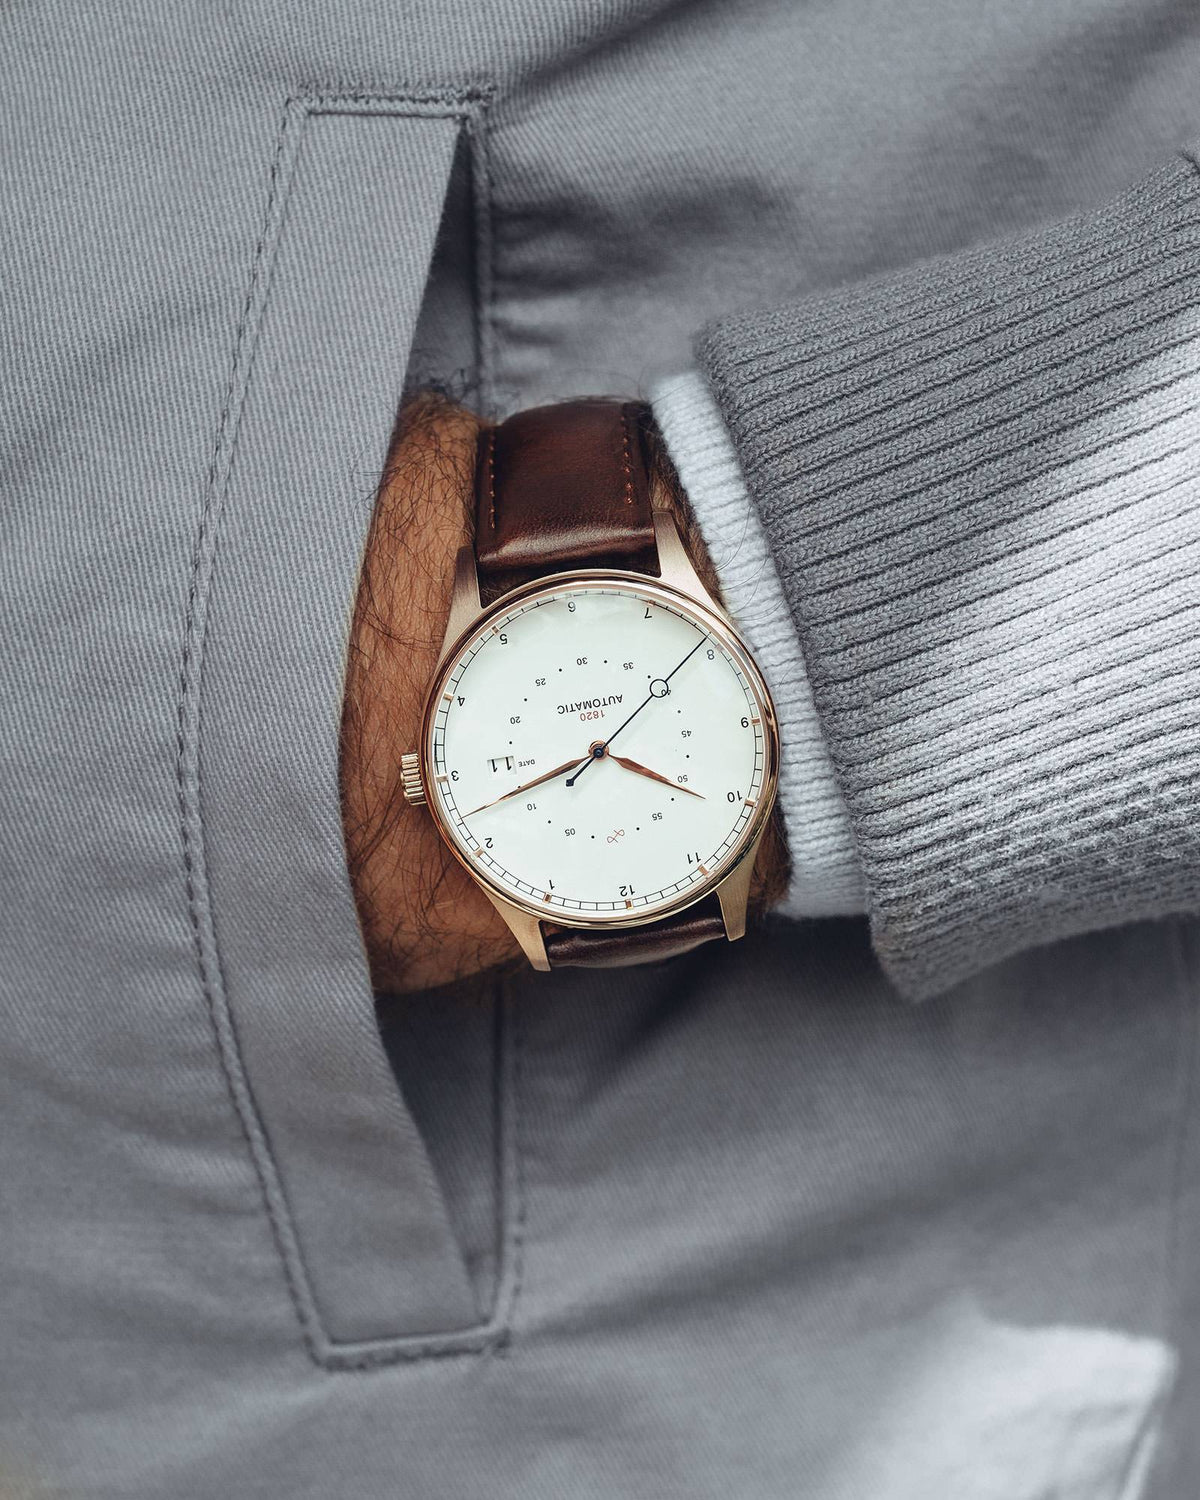 About Vintage - 1820 Automatic, Rose Gold / White #Color_Dark Brown